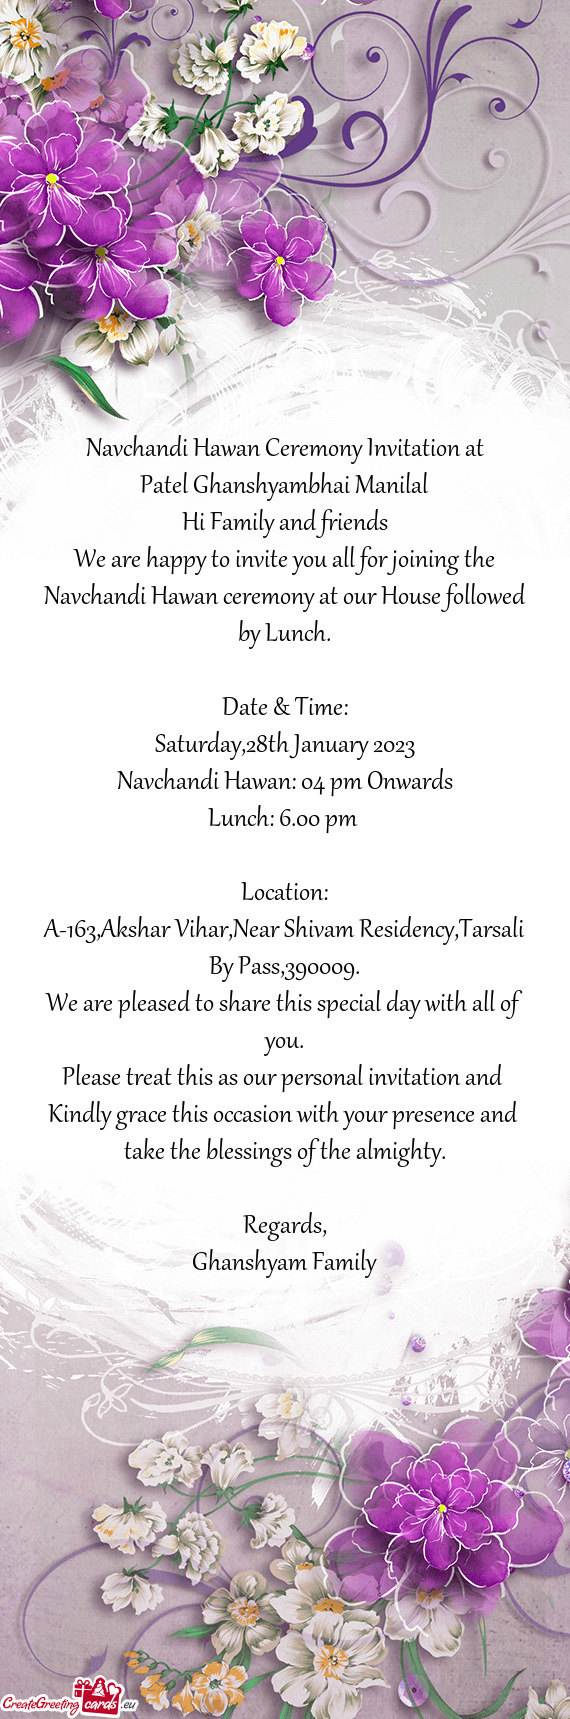 Navchandi Hawan ceremony at our House followed by Lunch